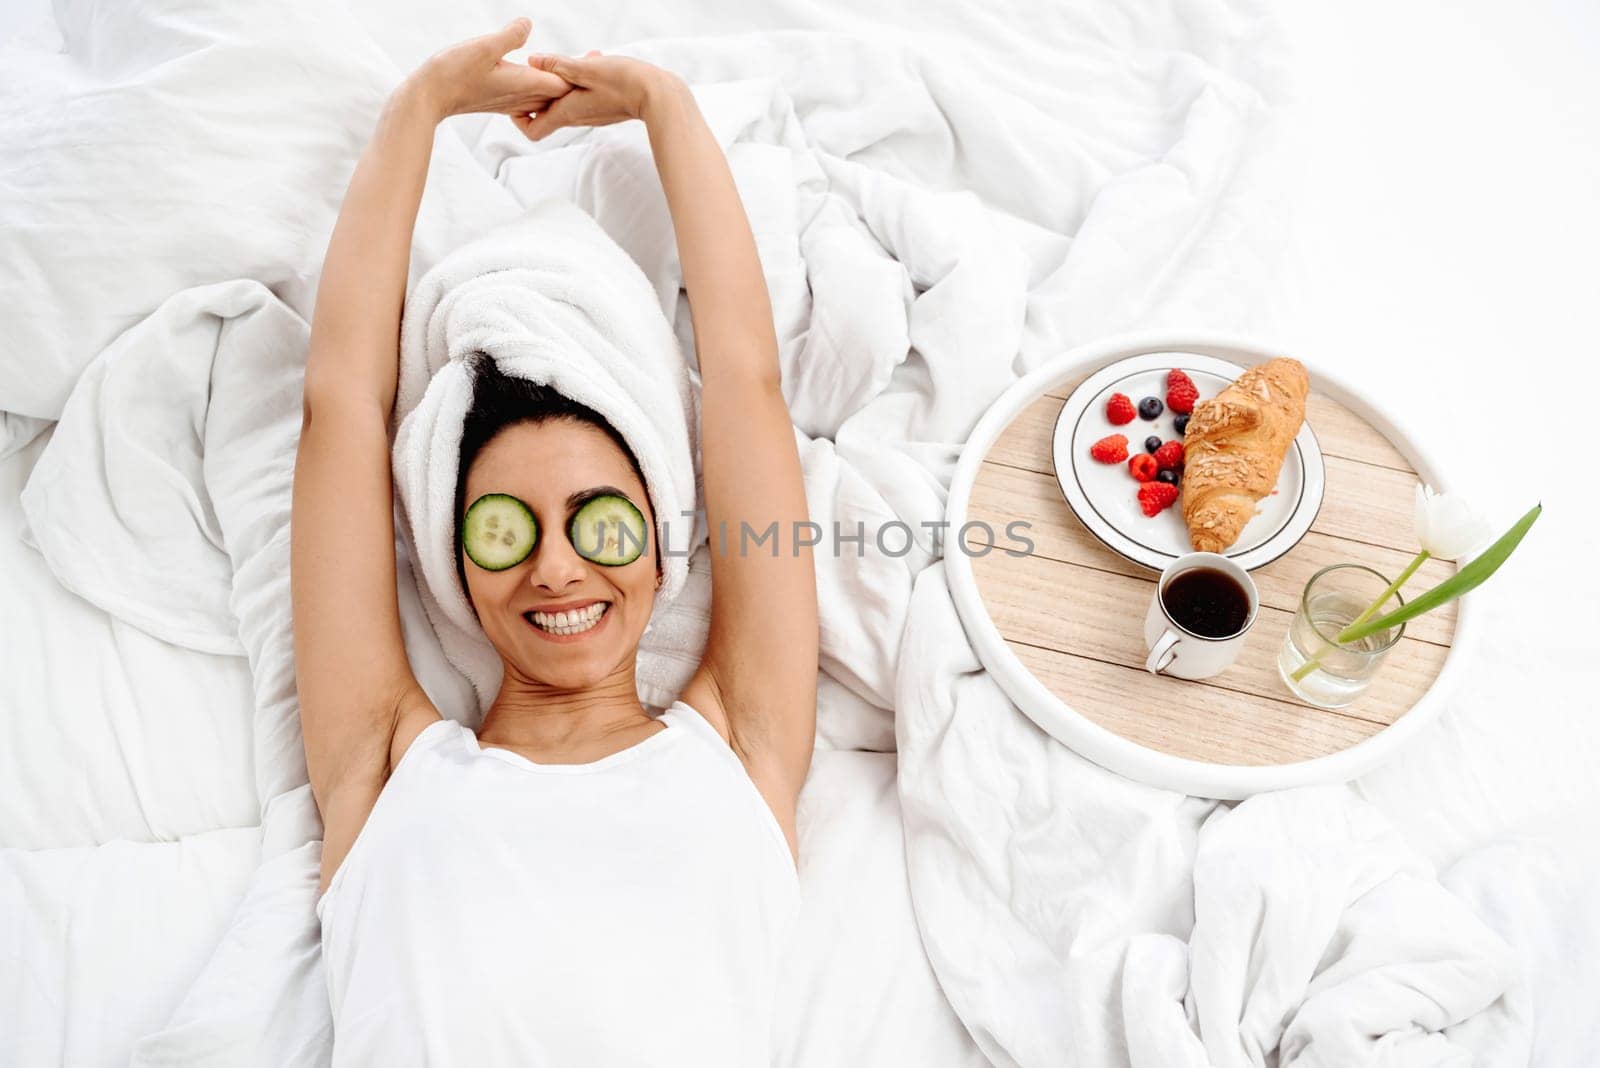 A woman starts morning with beauty rituals and a pleasant aesthetic breakfast by SistersStock